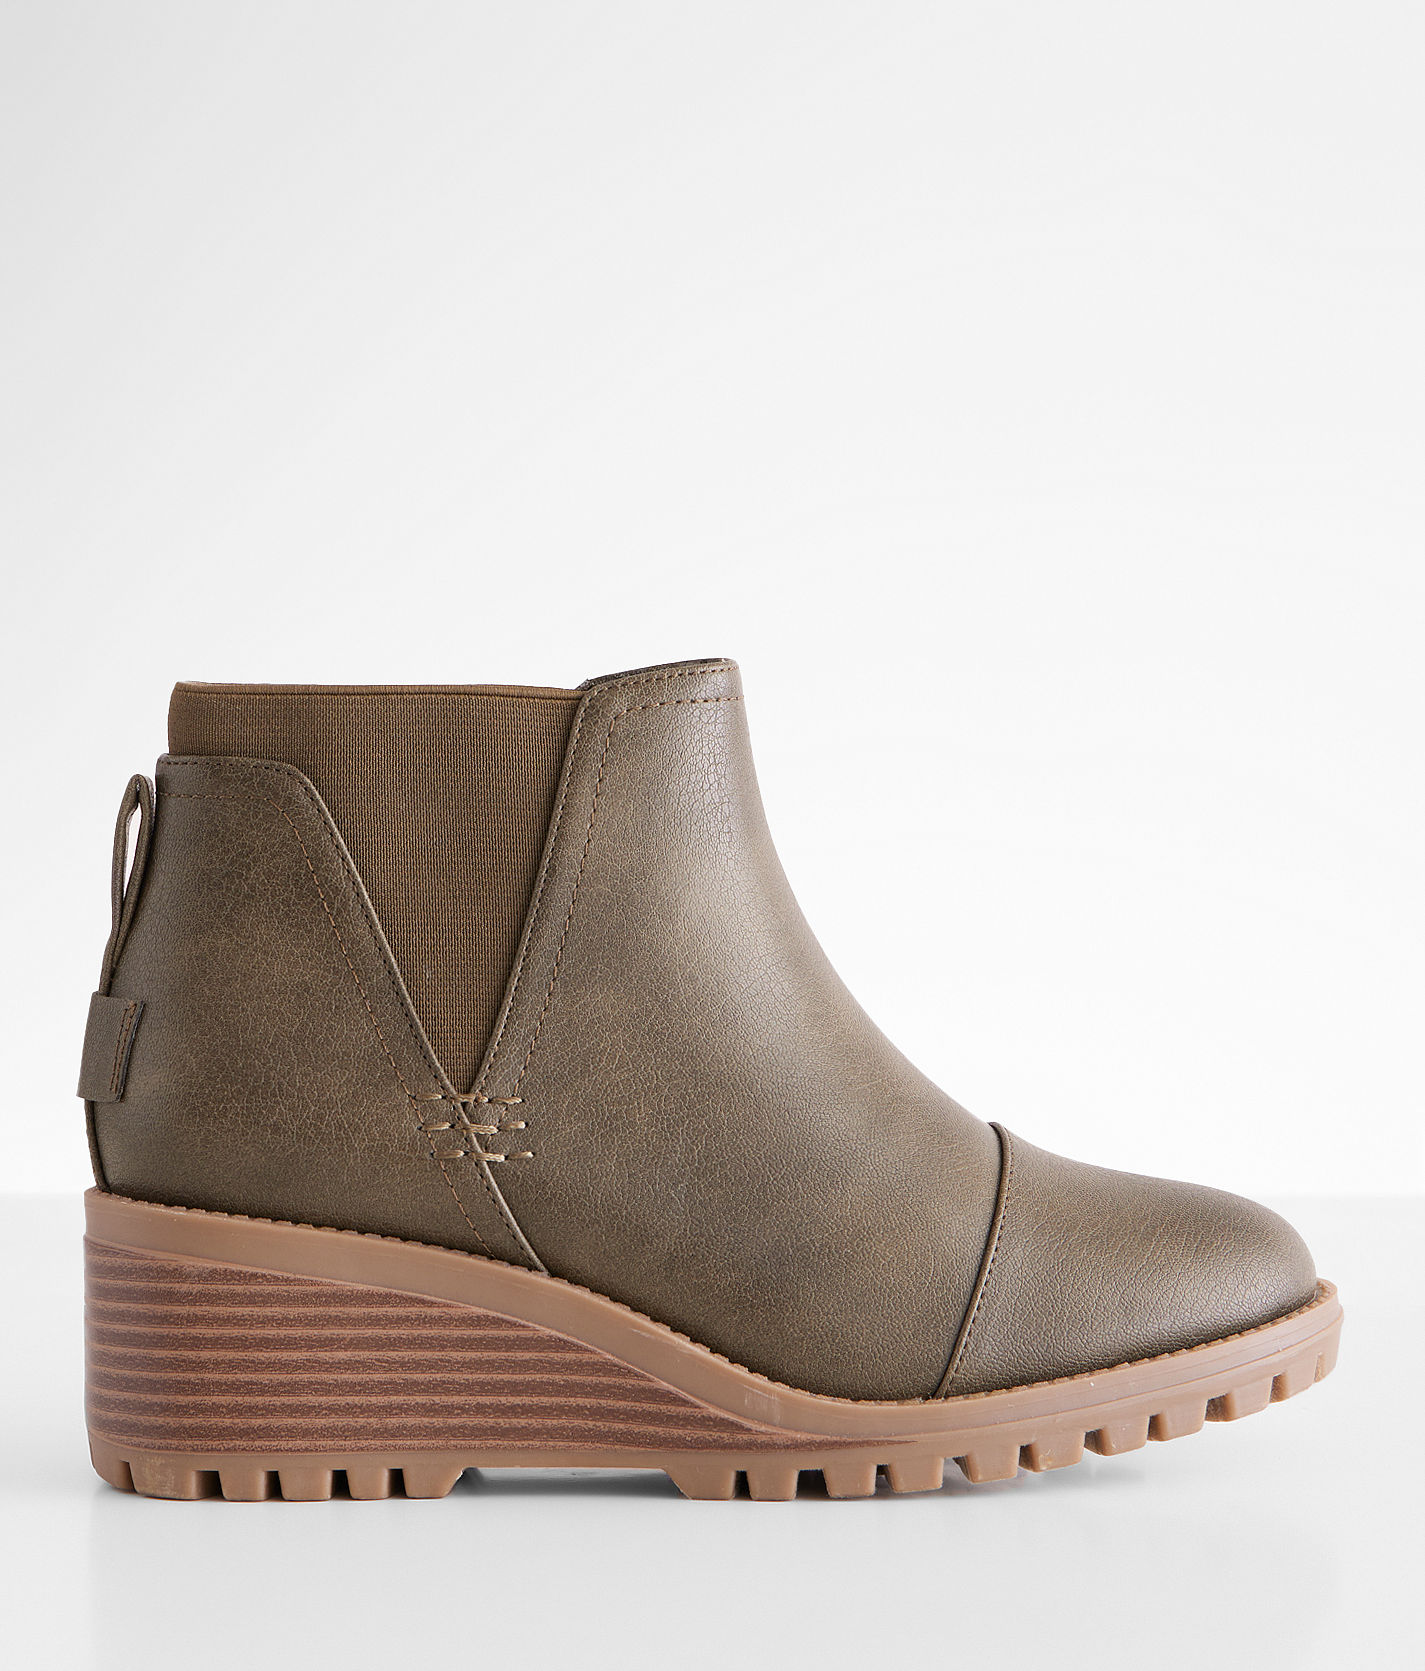 Vintage 93 Dante Boot - Women's Shoes in Olive Green | Buckle